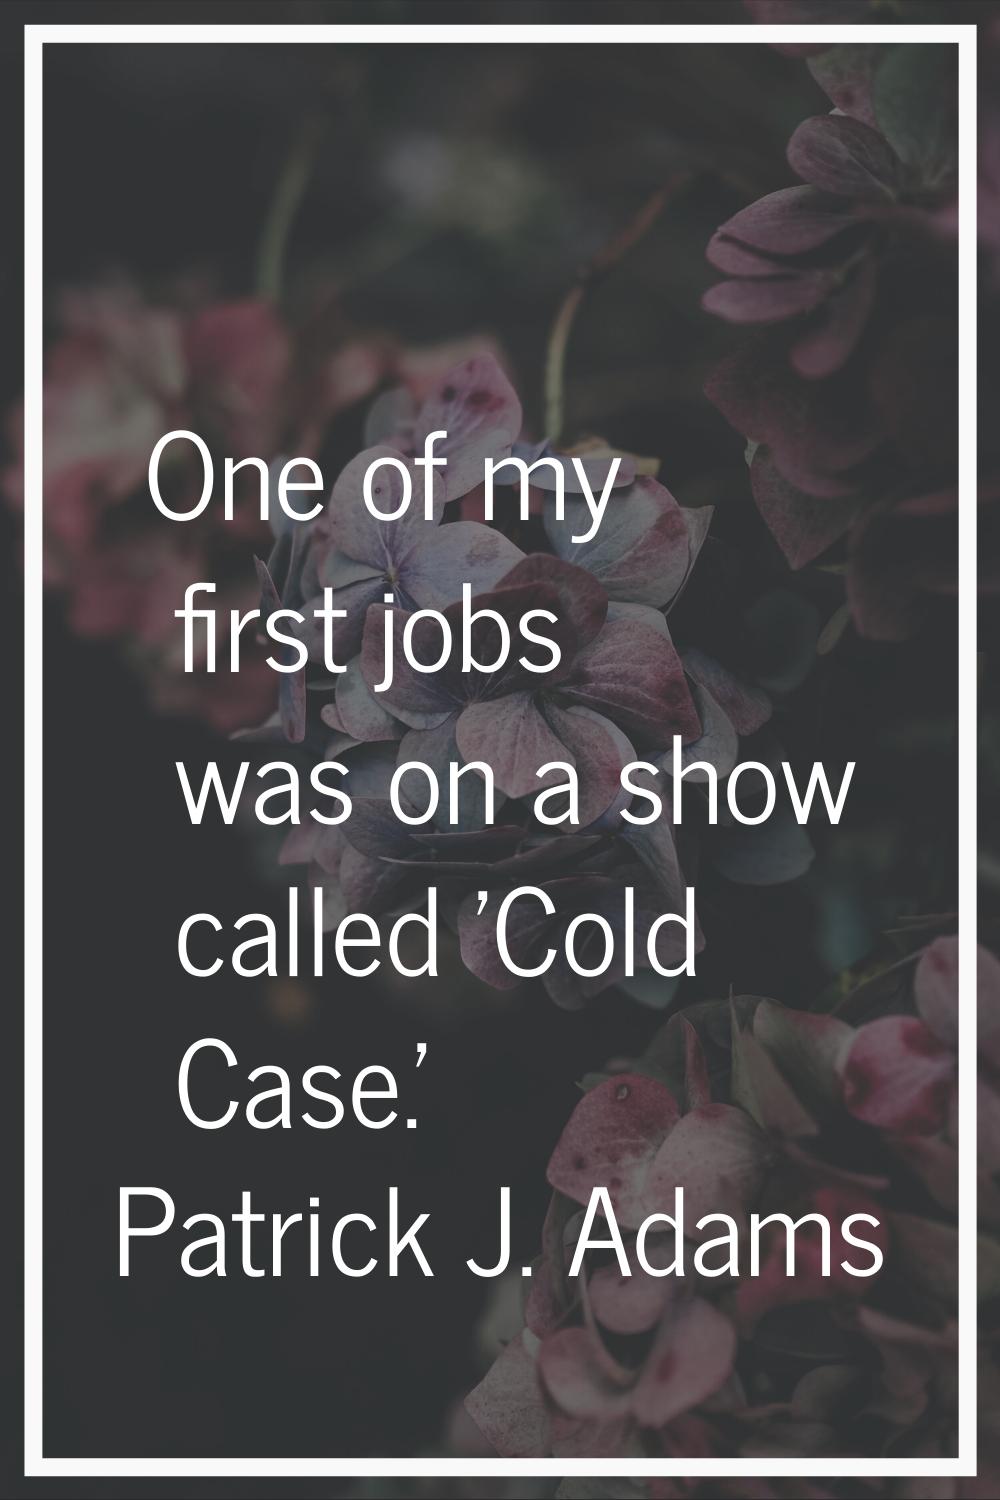 One of my first jobs was on a show called 'Cold Case.'